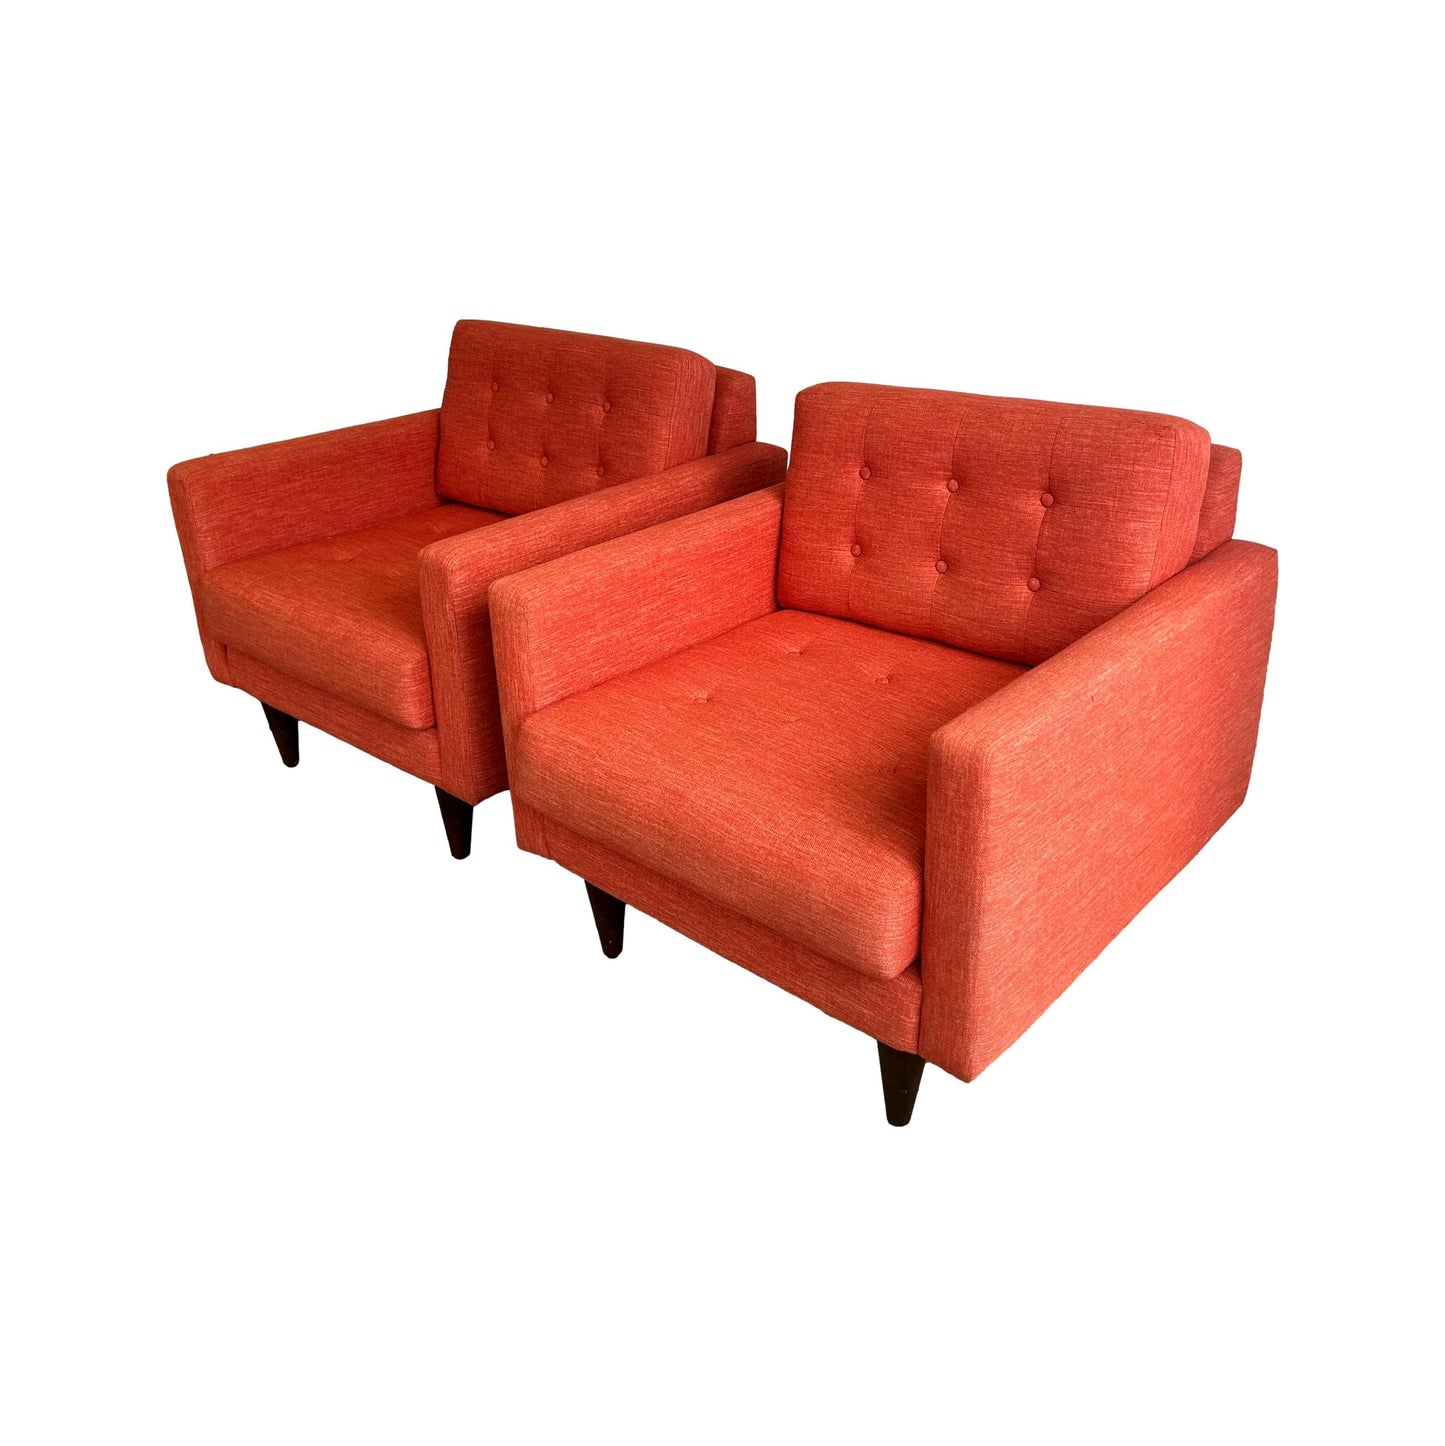 Pair of Orange Upholstered Arm Chairs